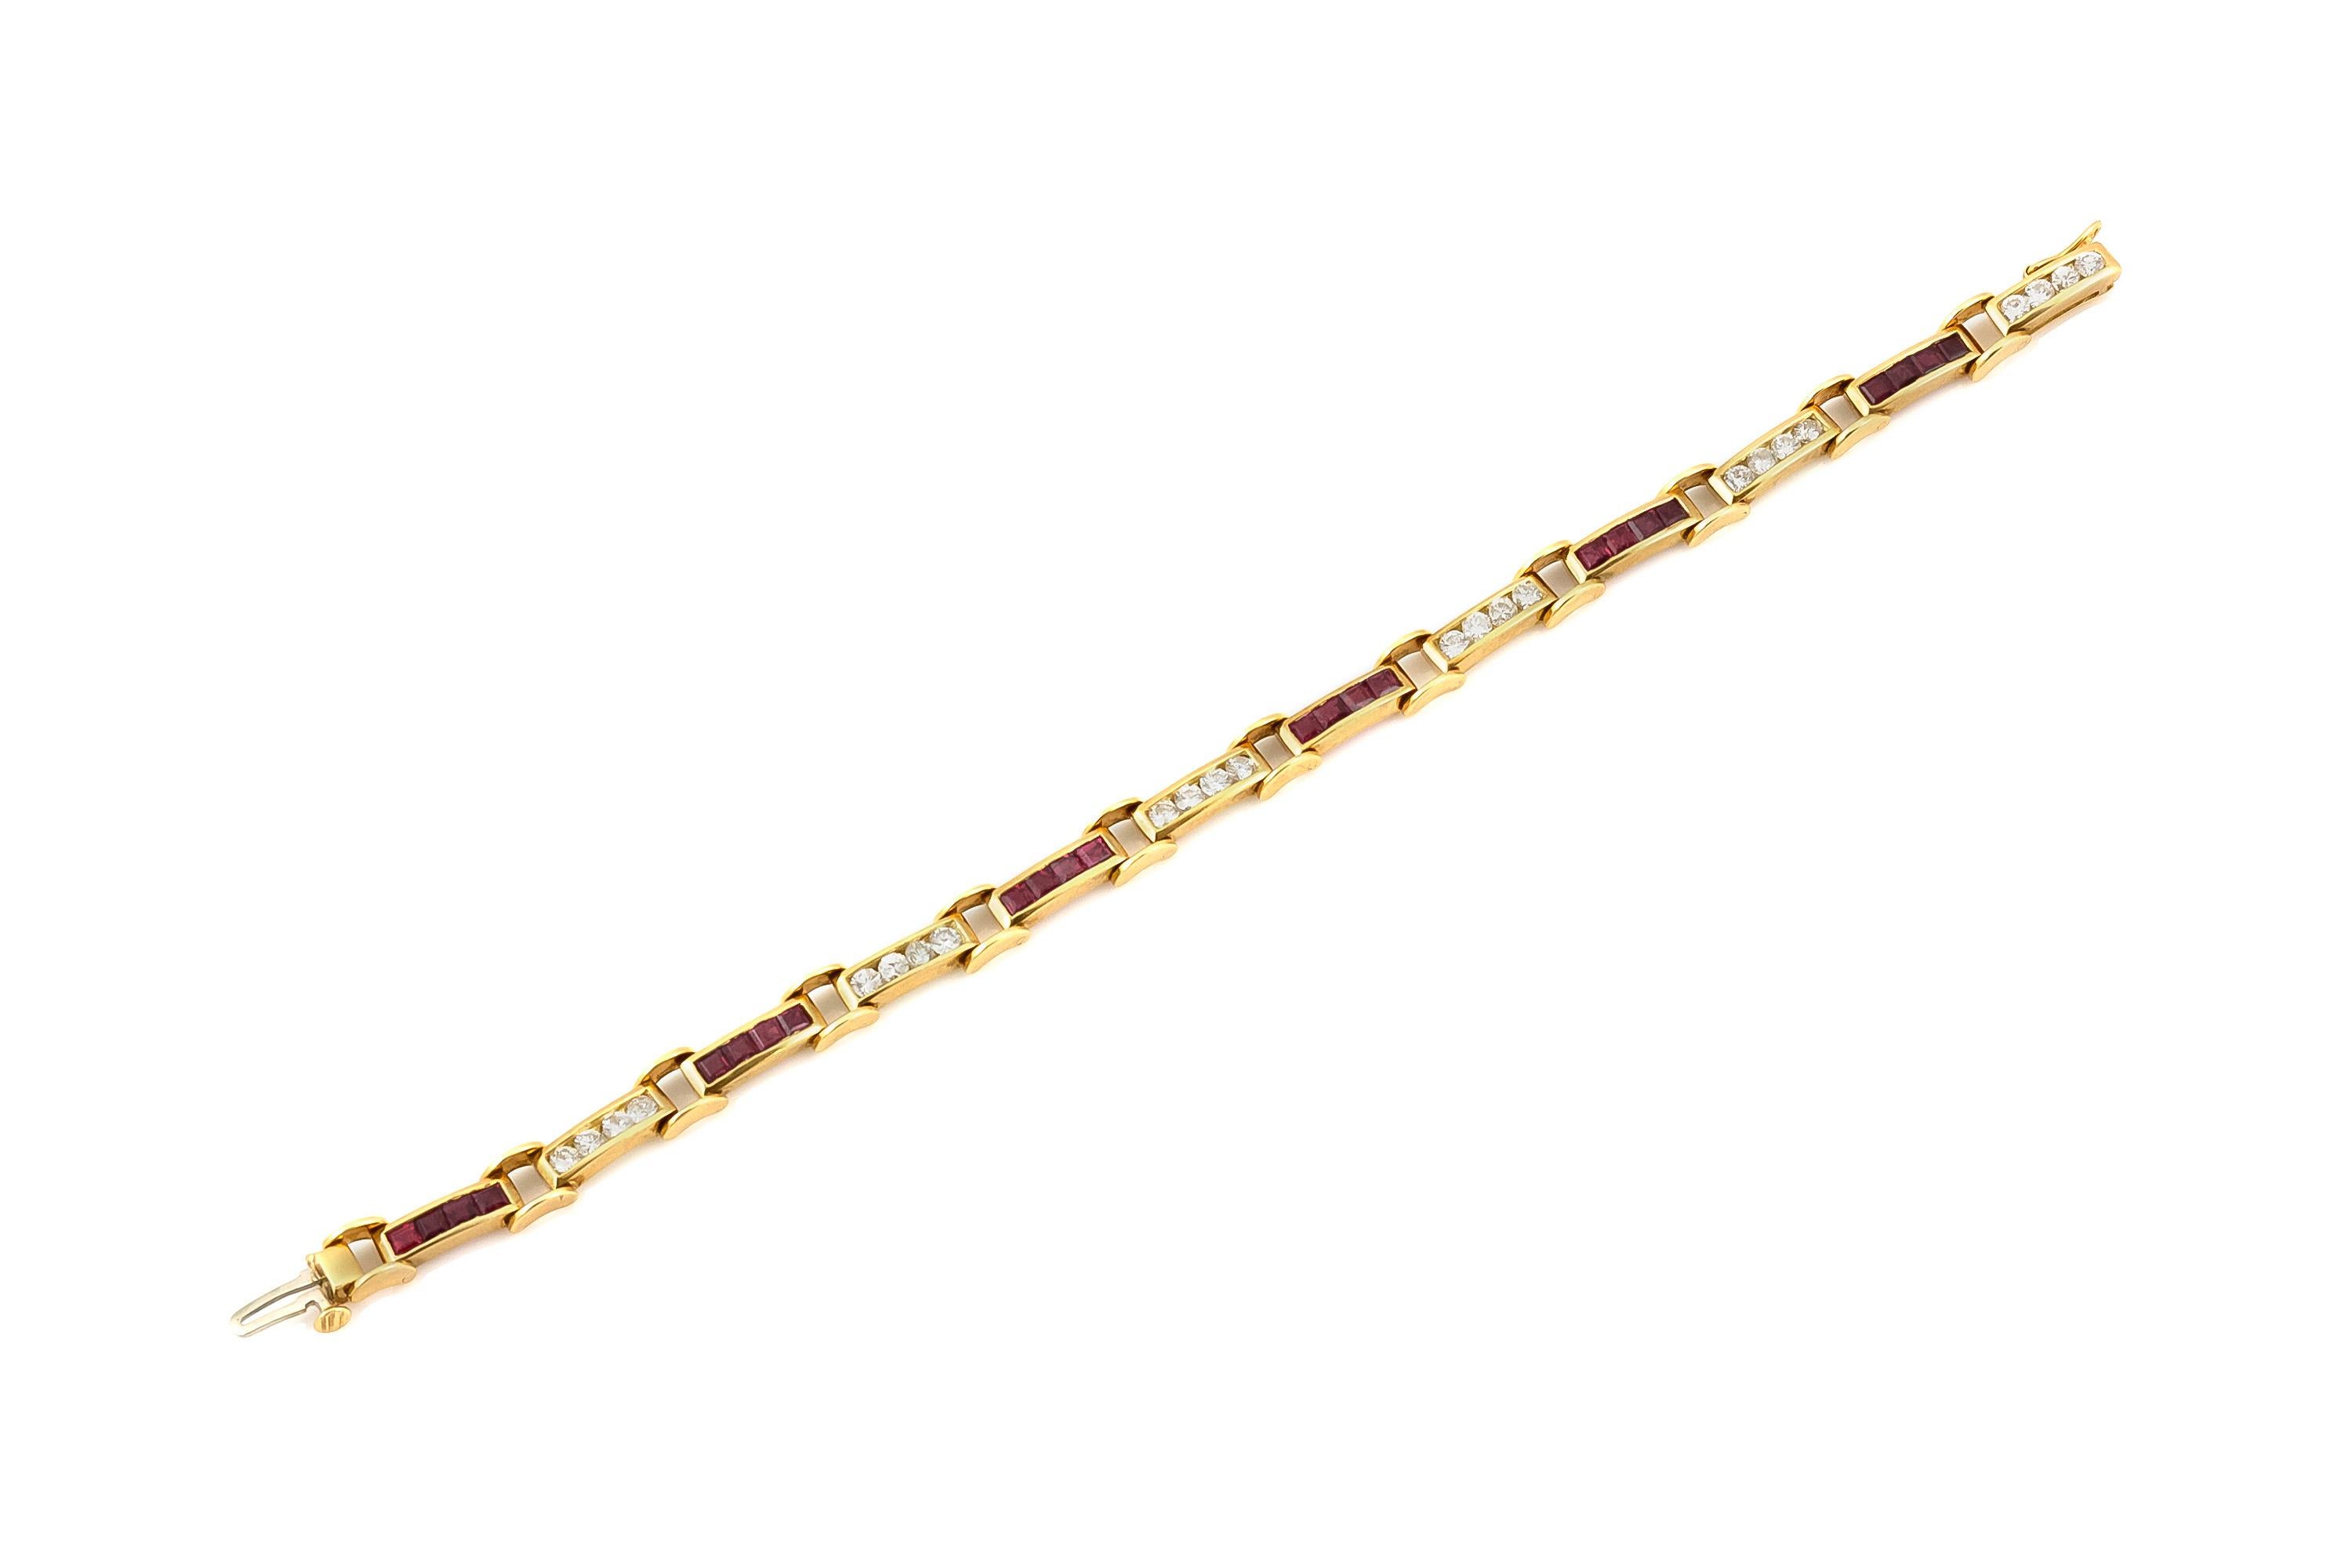 The bracelet is finely crafted in 18k yellow gold with diamonds weighing approximately total of 1.50 carat and rubies weighing approximately total of 2.50 carat.
Circa 1980.